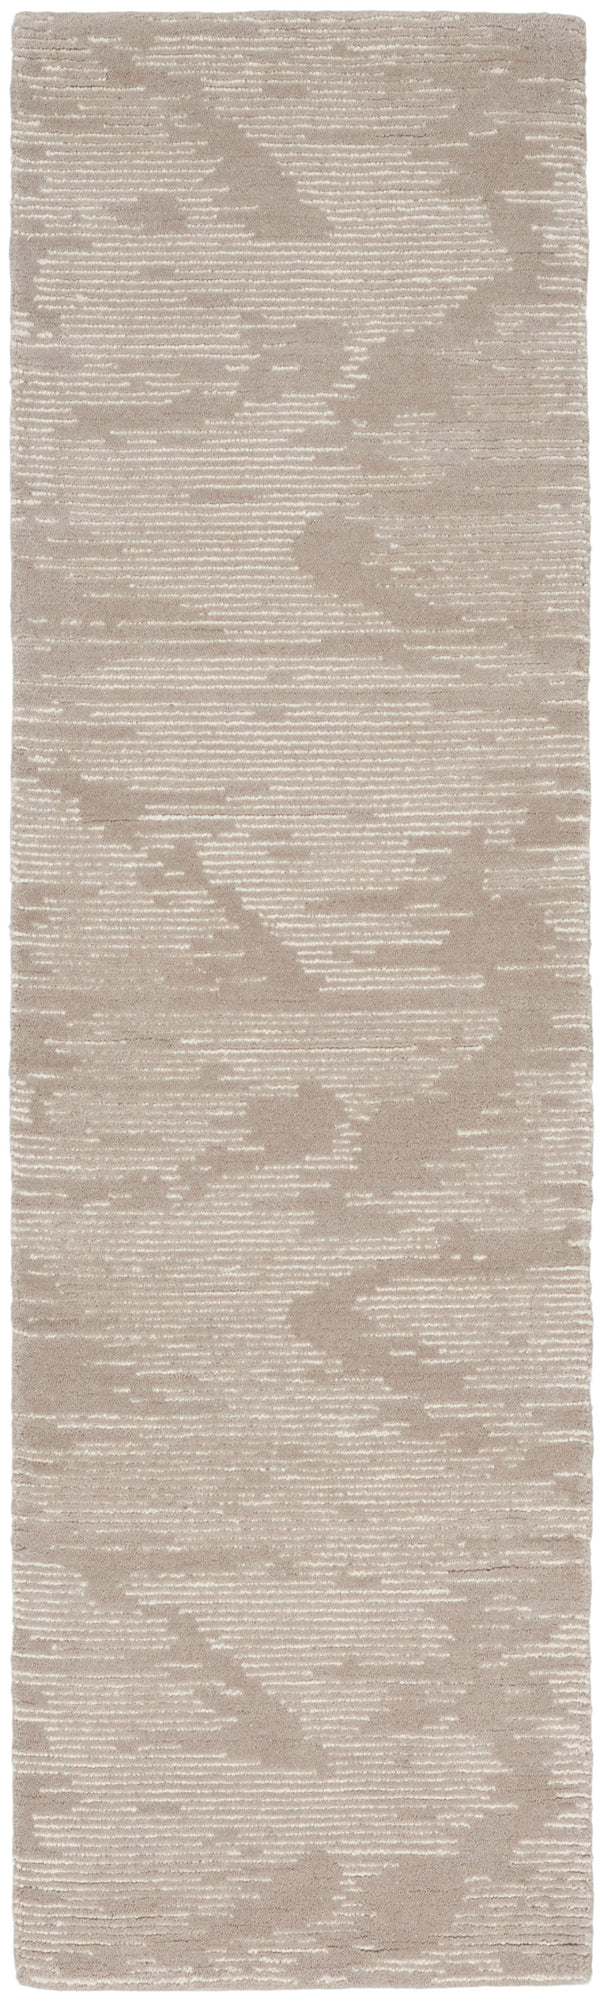 Michael Amini Ma30 Star SMR02 Taupe/Ivory Glam Indoor Rug